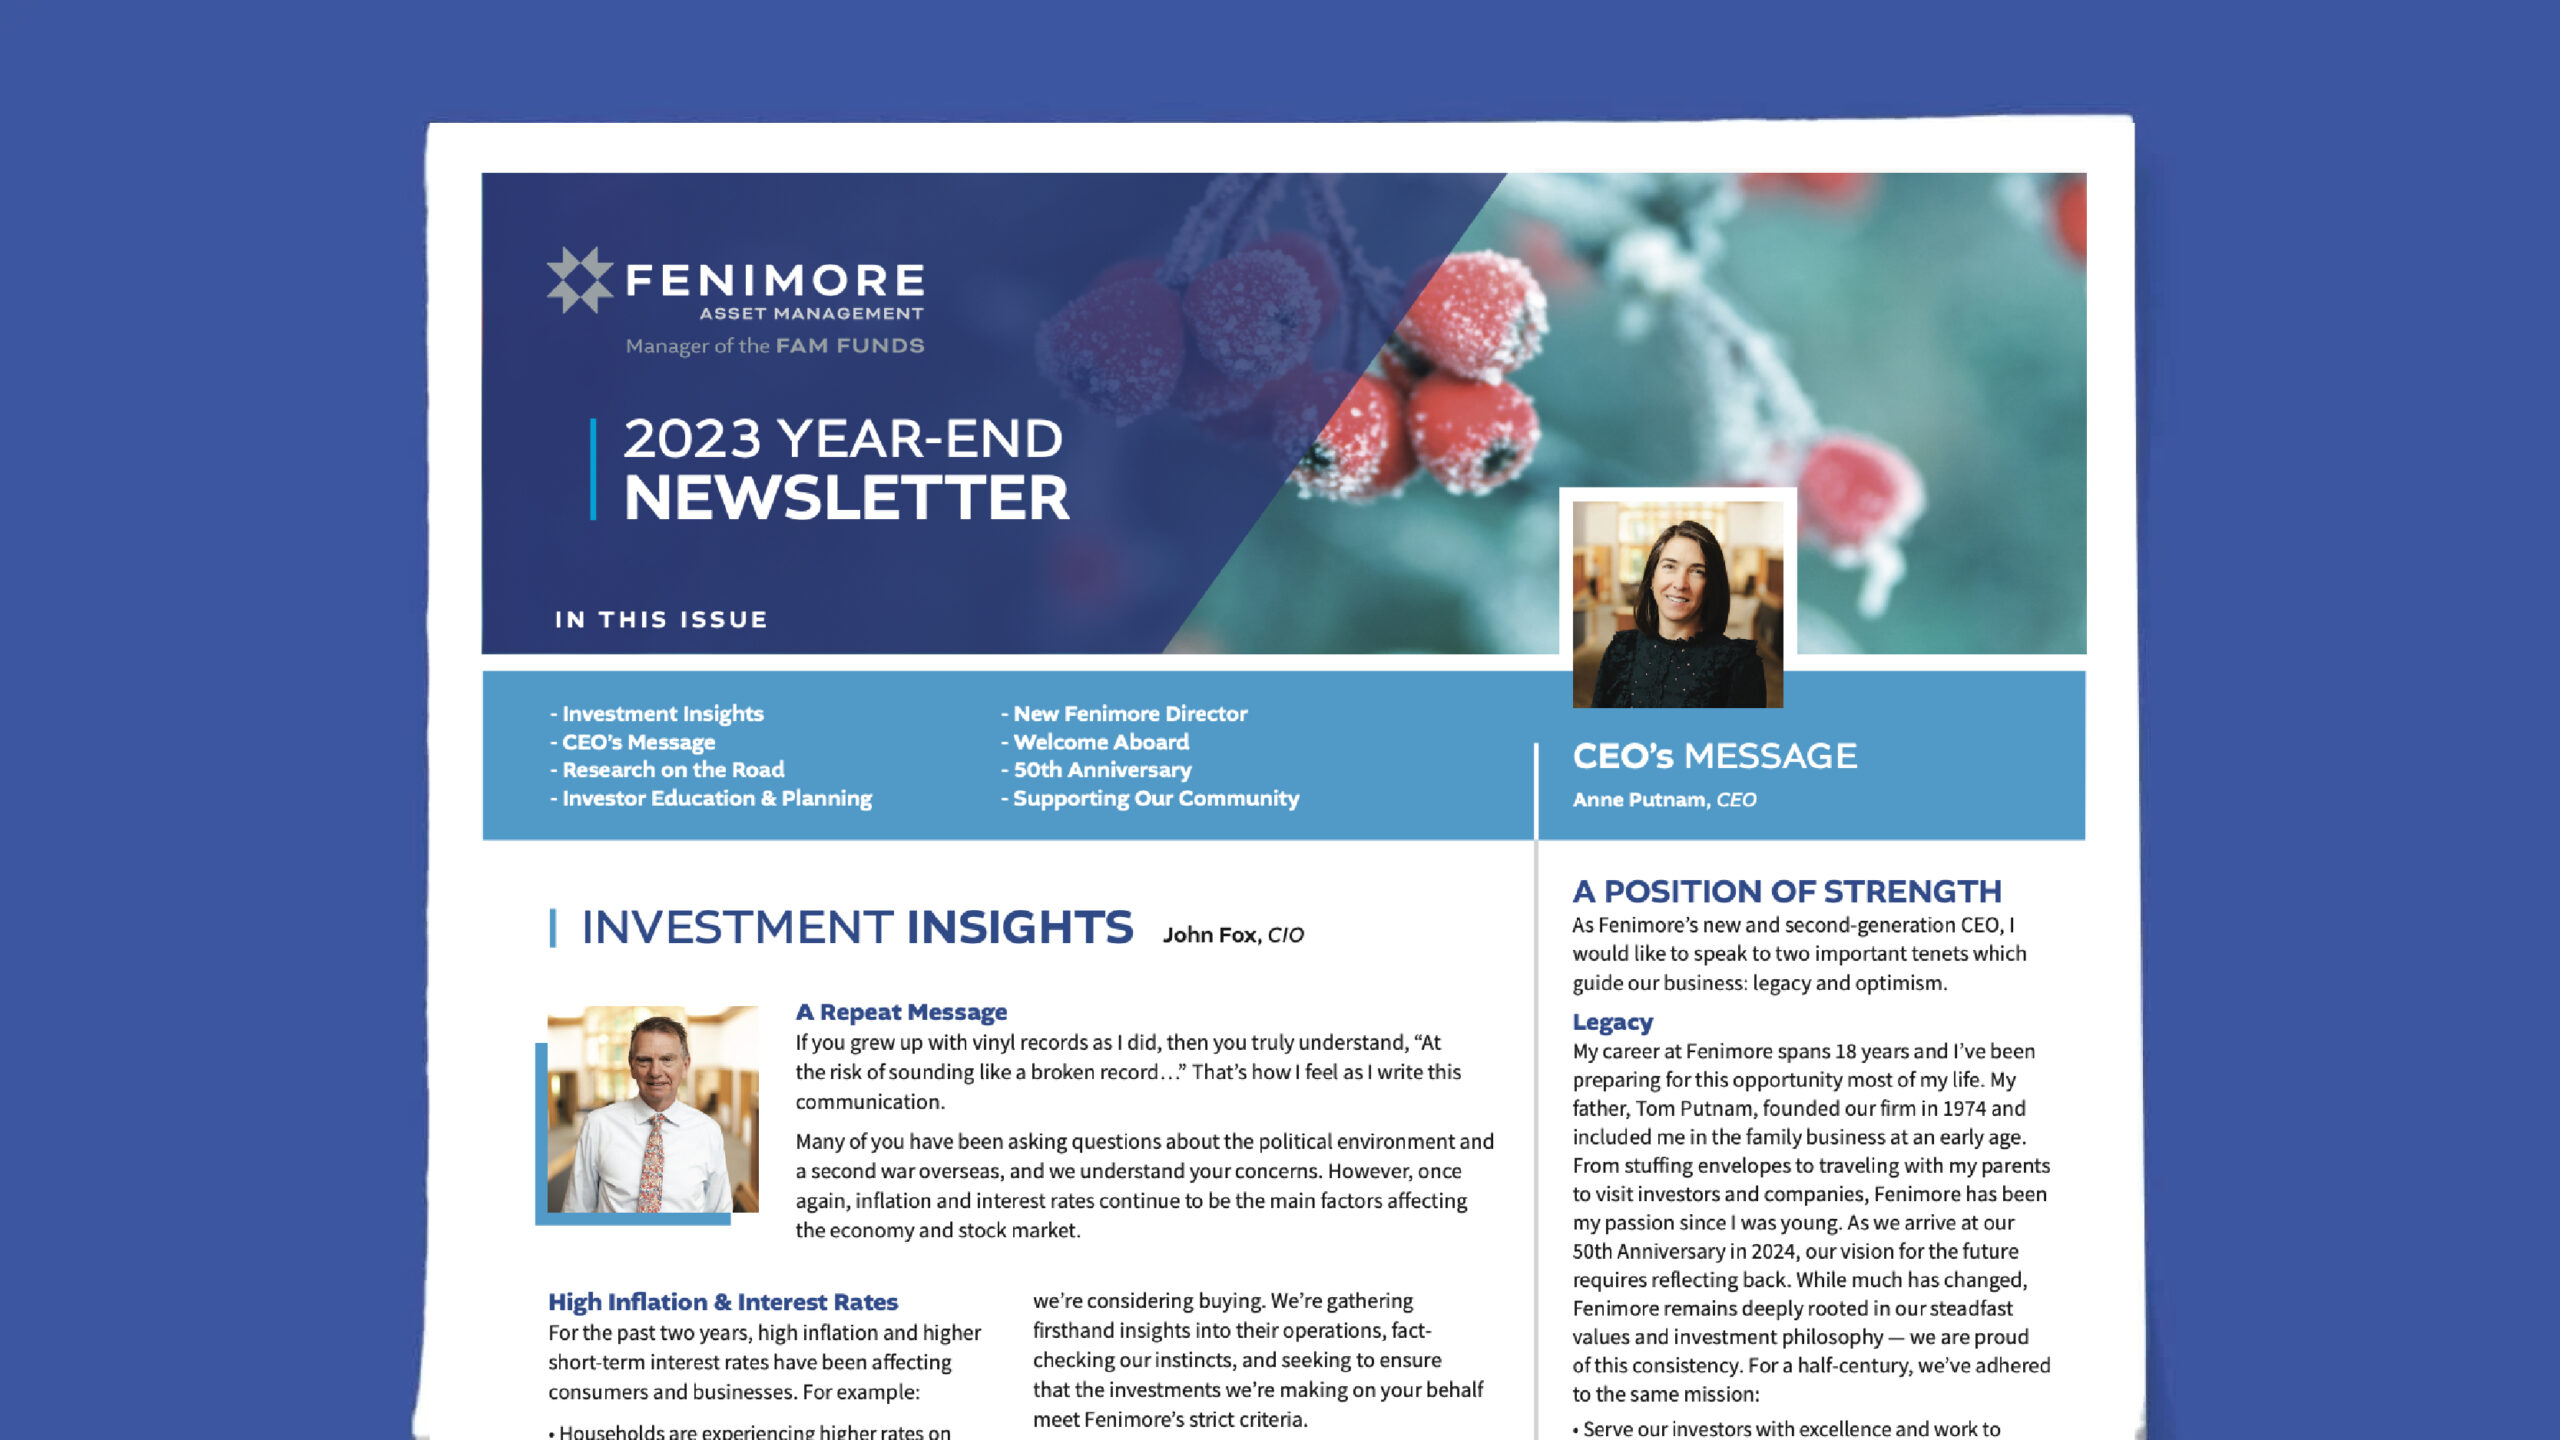 Fenimore’s 2023 Year-End Newsletter